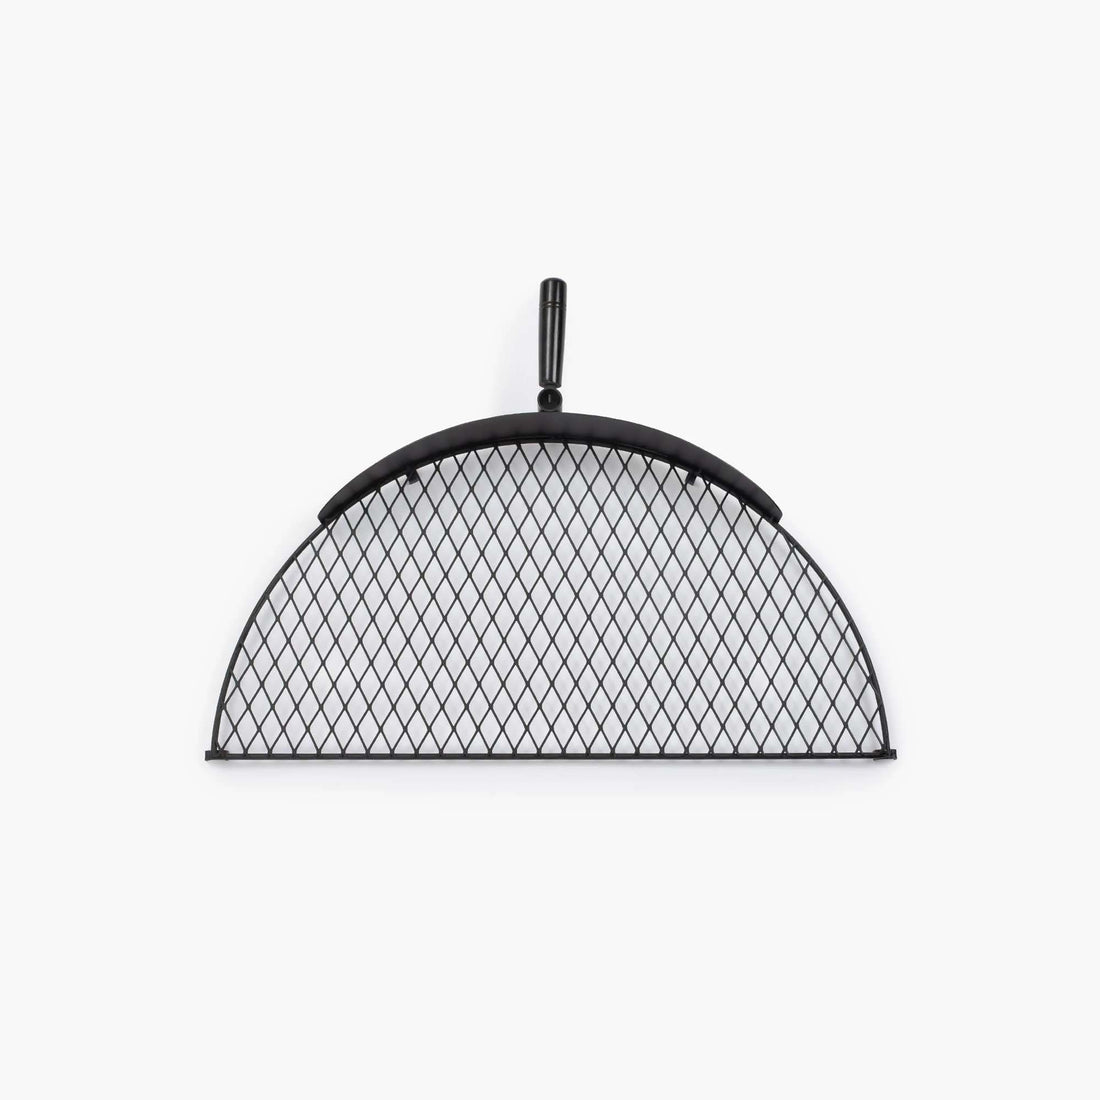 COWBOY FIRE PIT GRILL GRATE - 23"